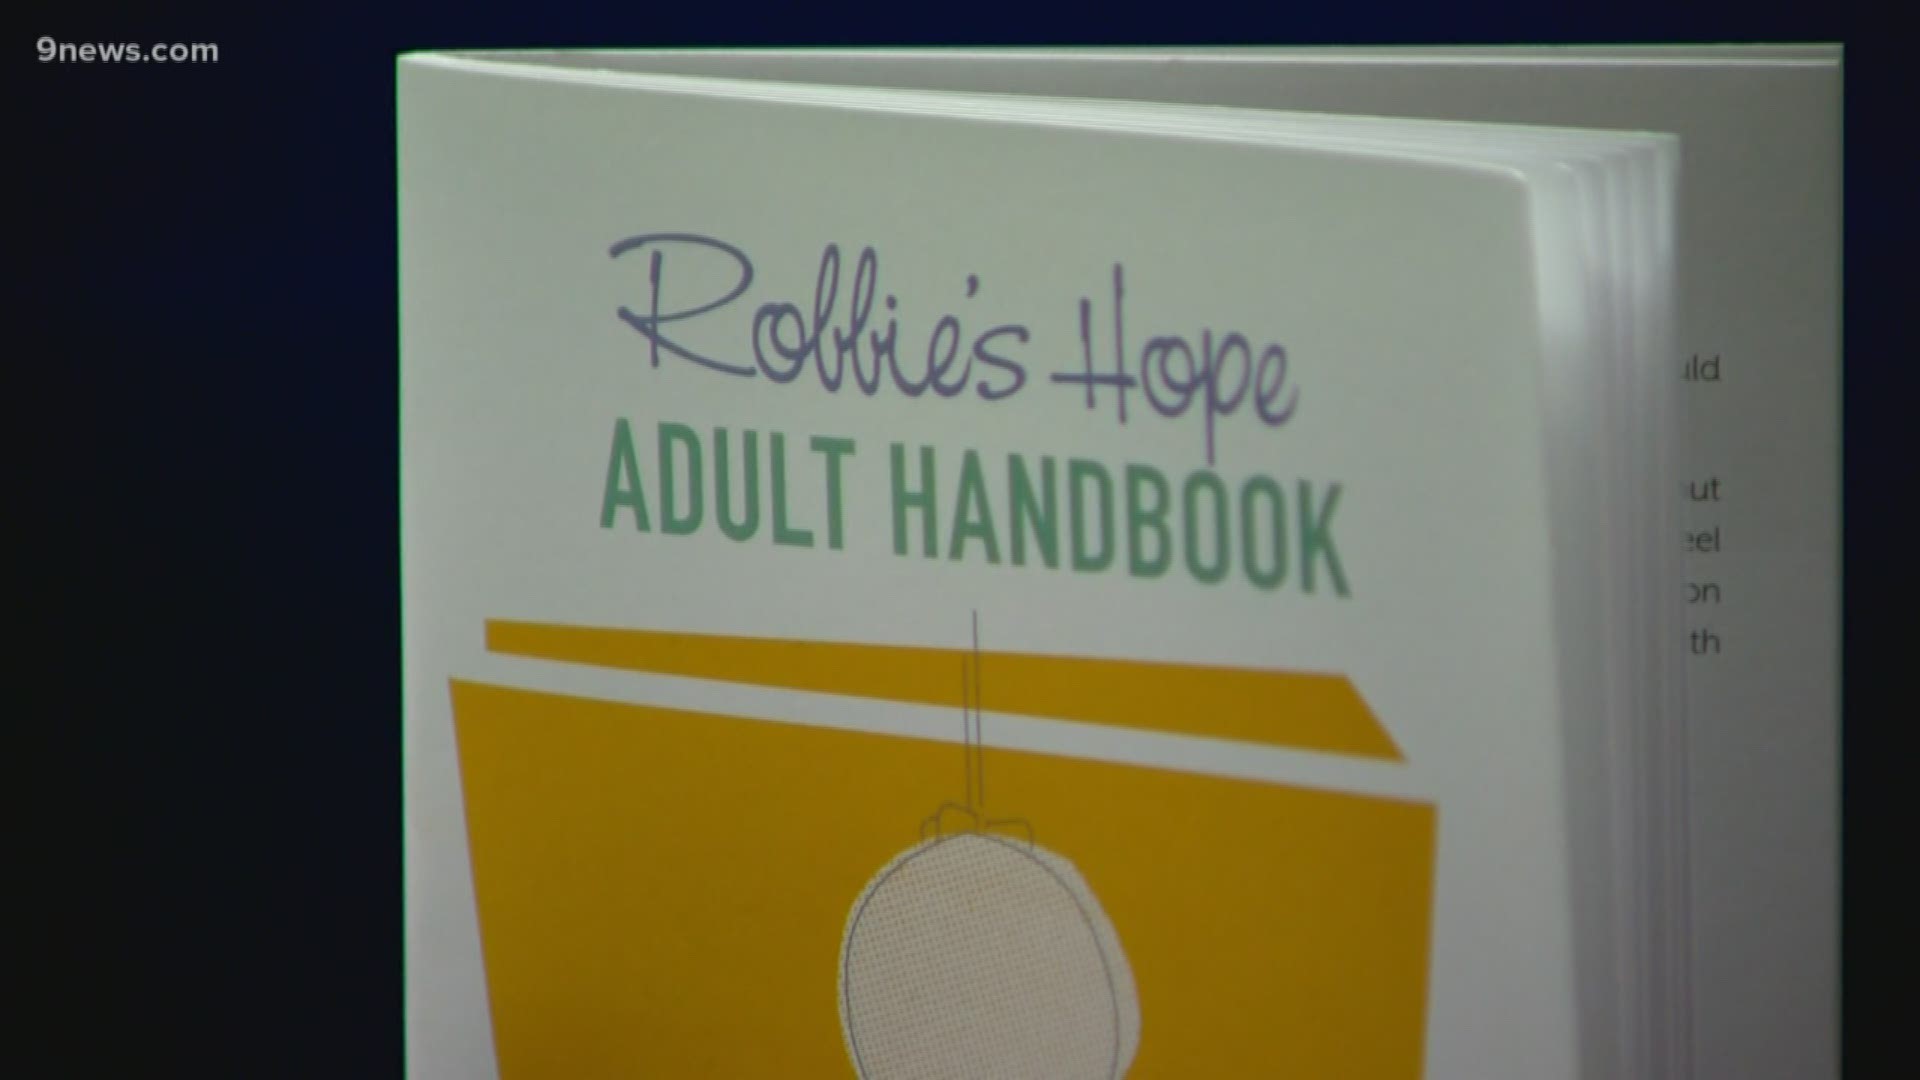 Robbie's Hope aims to cut teen suicide rates in half by 2028